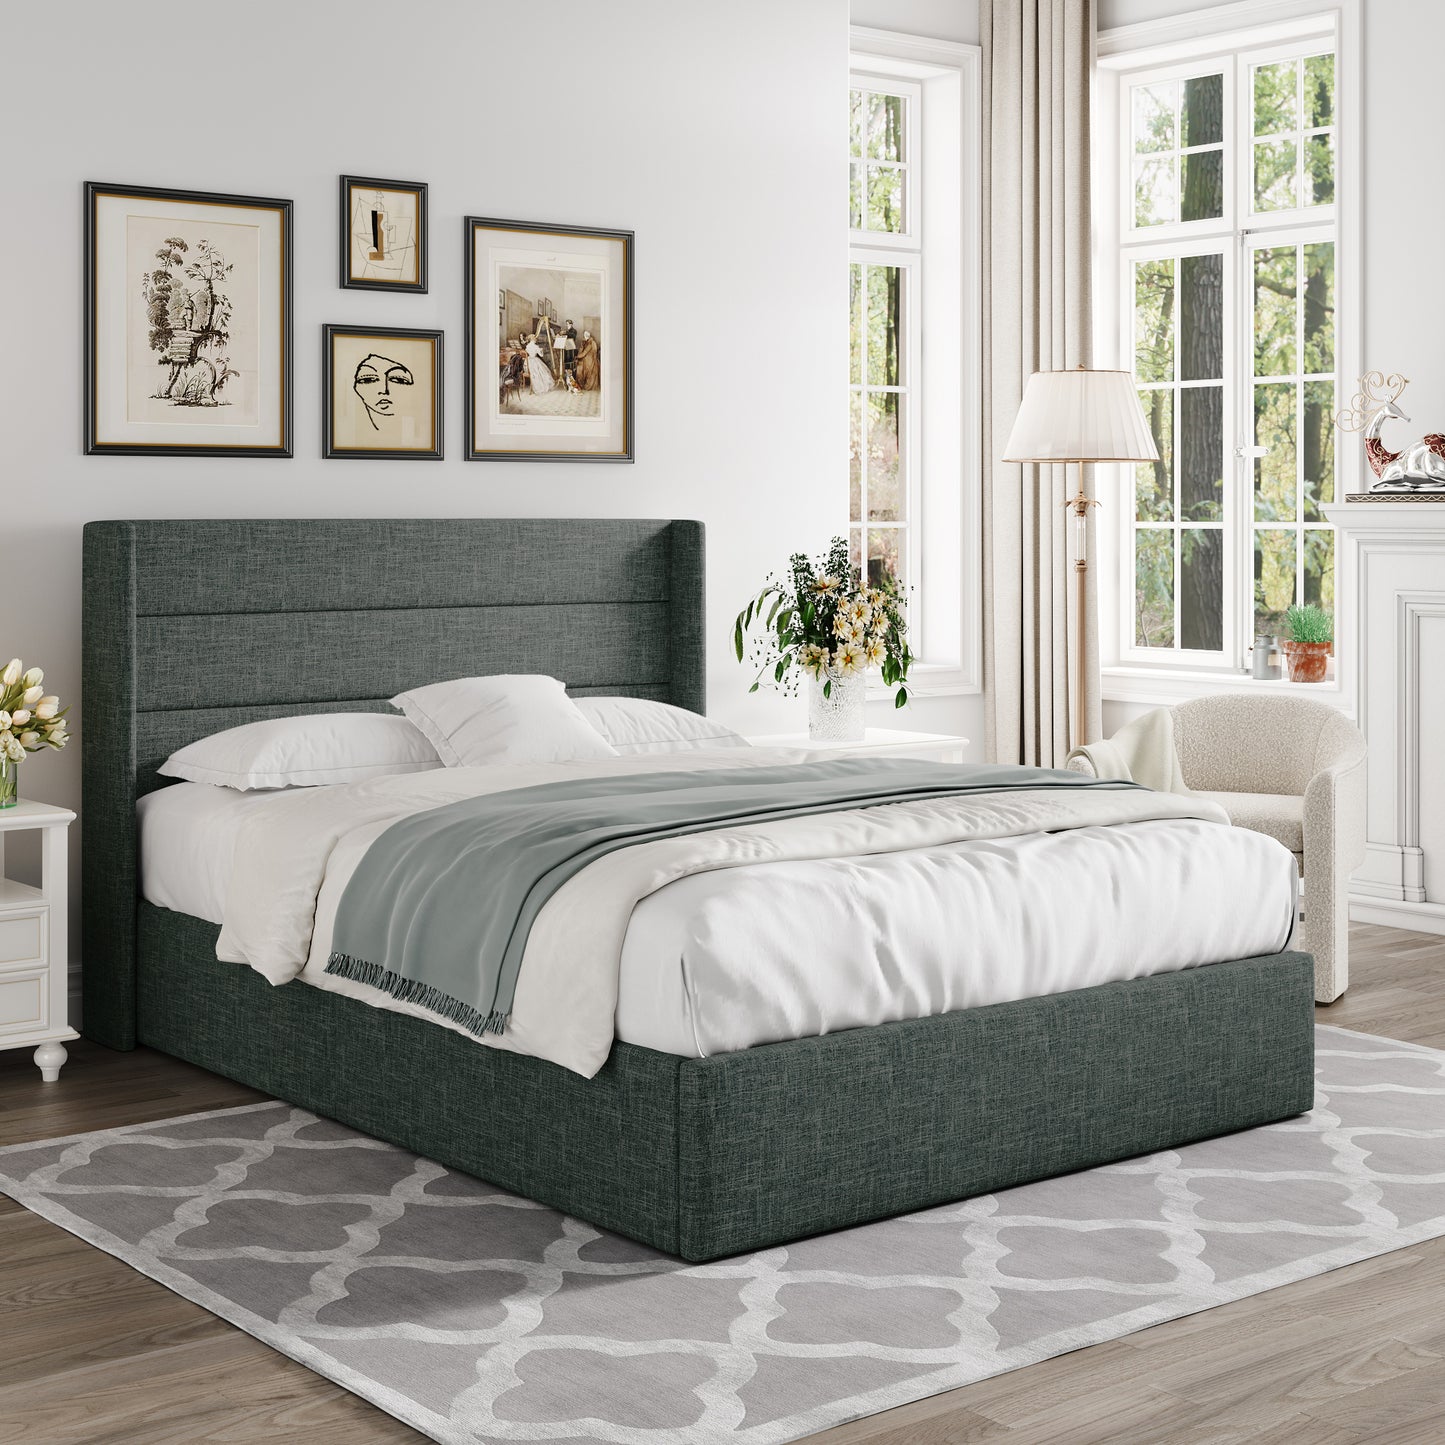 Allewie Lift Up Storage Upholstered Bed with Pannel Wingback Headboard